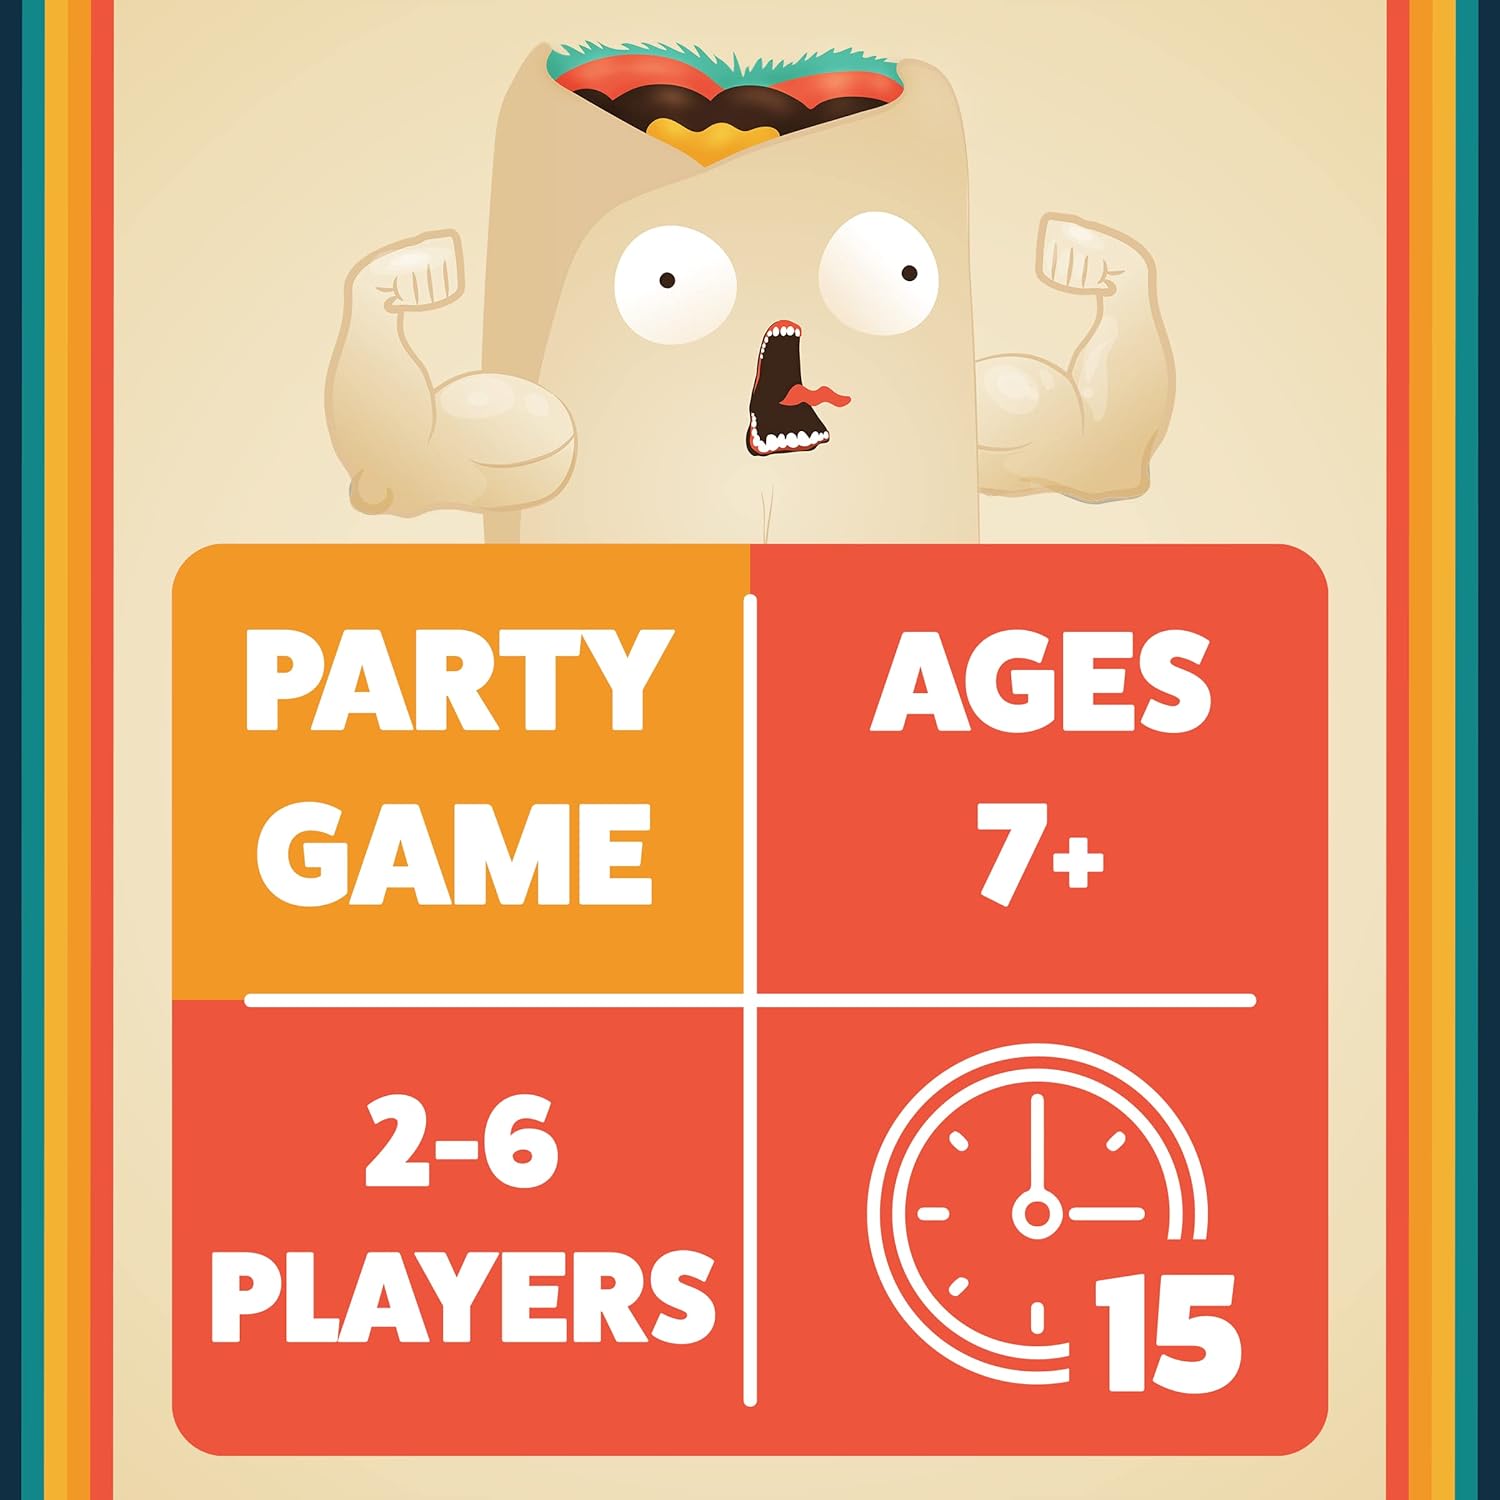 Throw Throw Burrito by Exploding Kittens - A Dodgeball Card Game - Family-Friendly Party Games